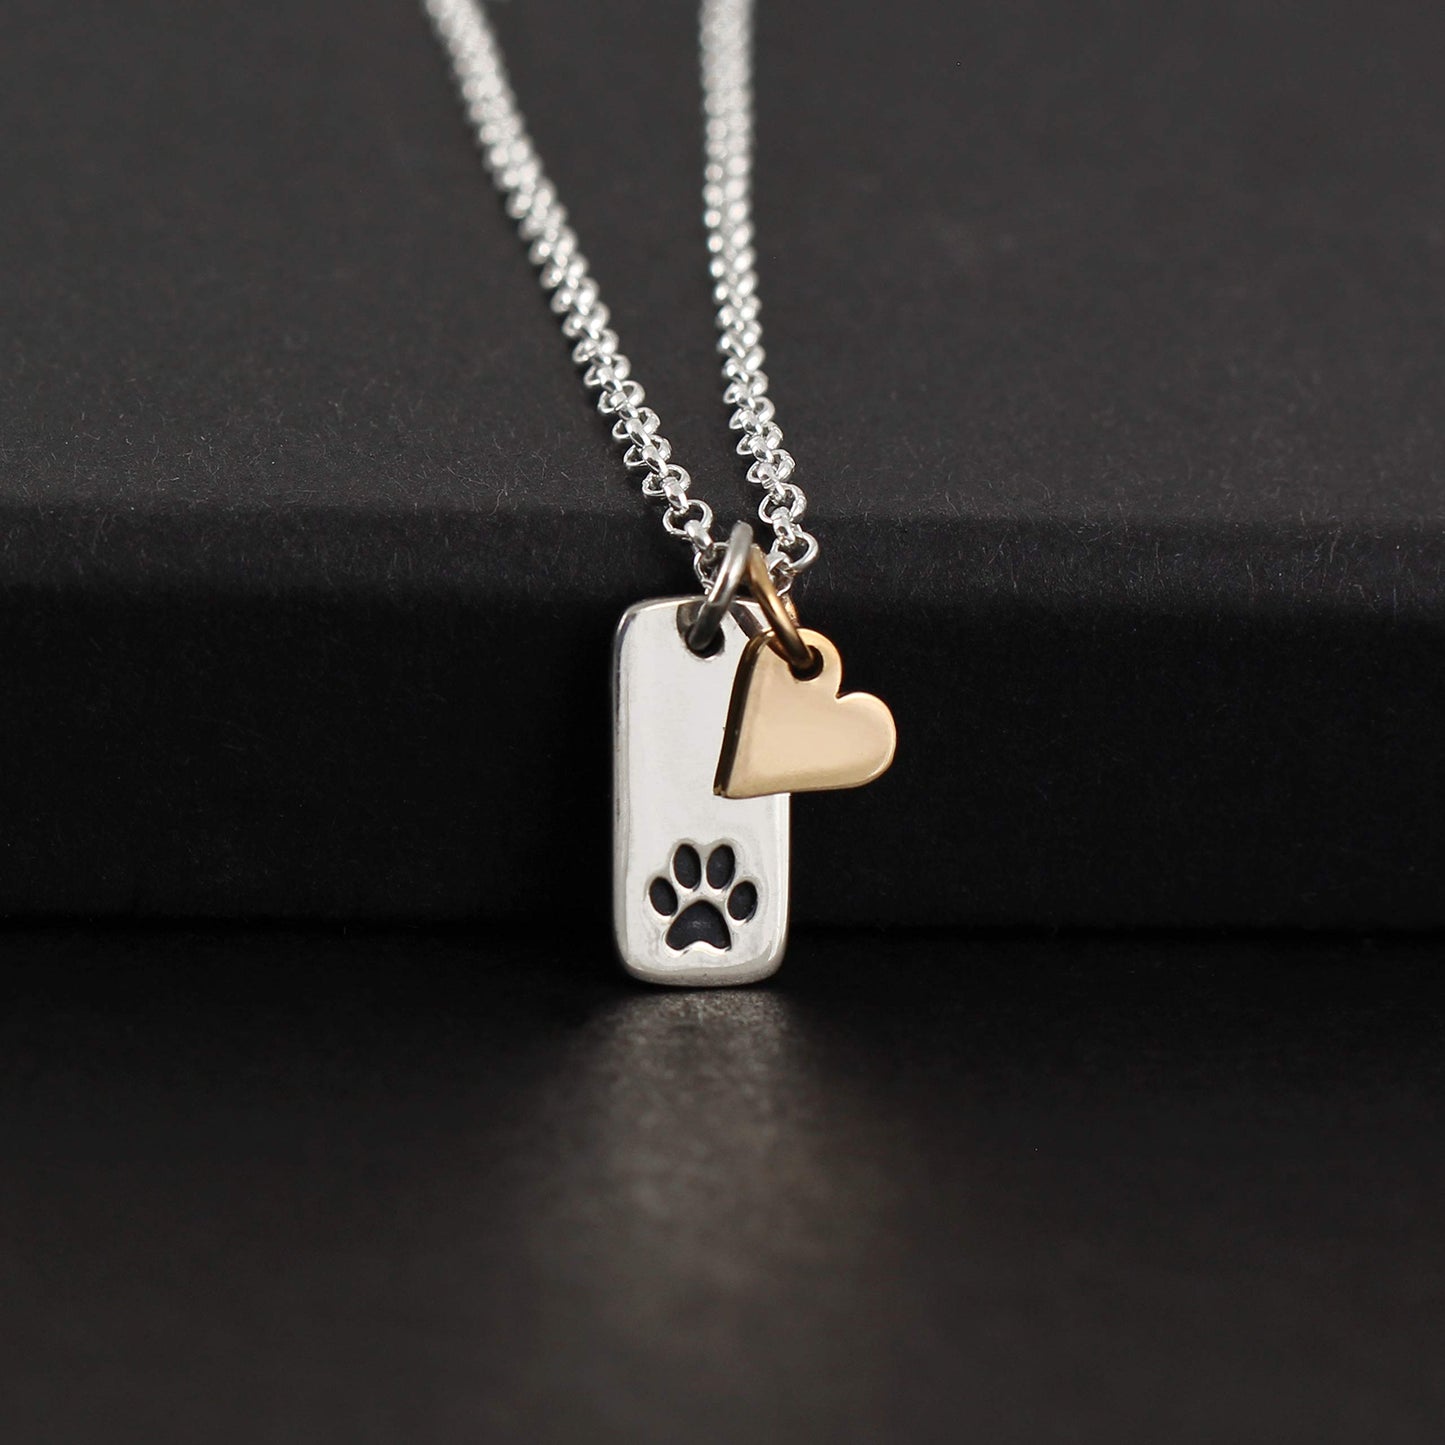 Gift for Loss of Pet • Sterling Silver Paw Print and Gold Heart Necklace • Grief Jewelry for Women Girls • Pawprints on my Heart • Sorry for Your Loss of Dog Cat • Pet Memorial • No Longer by my Side